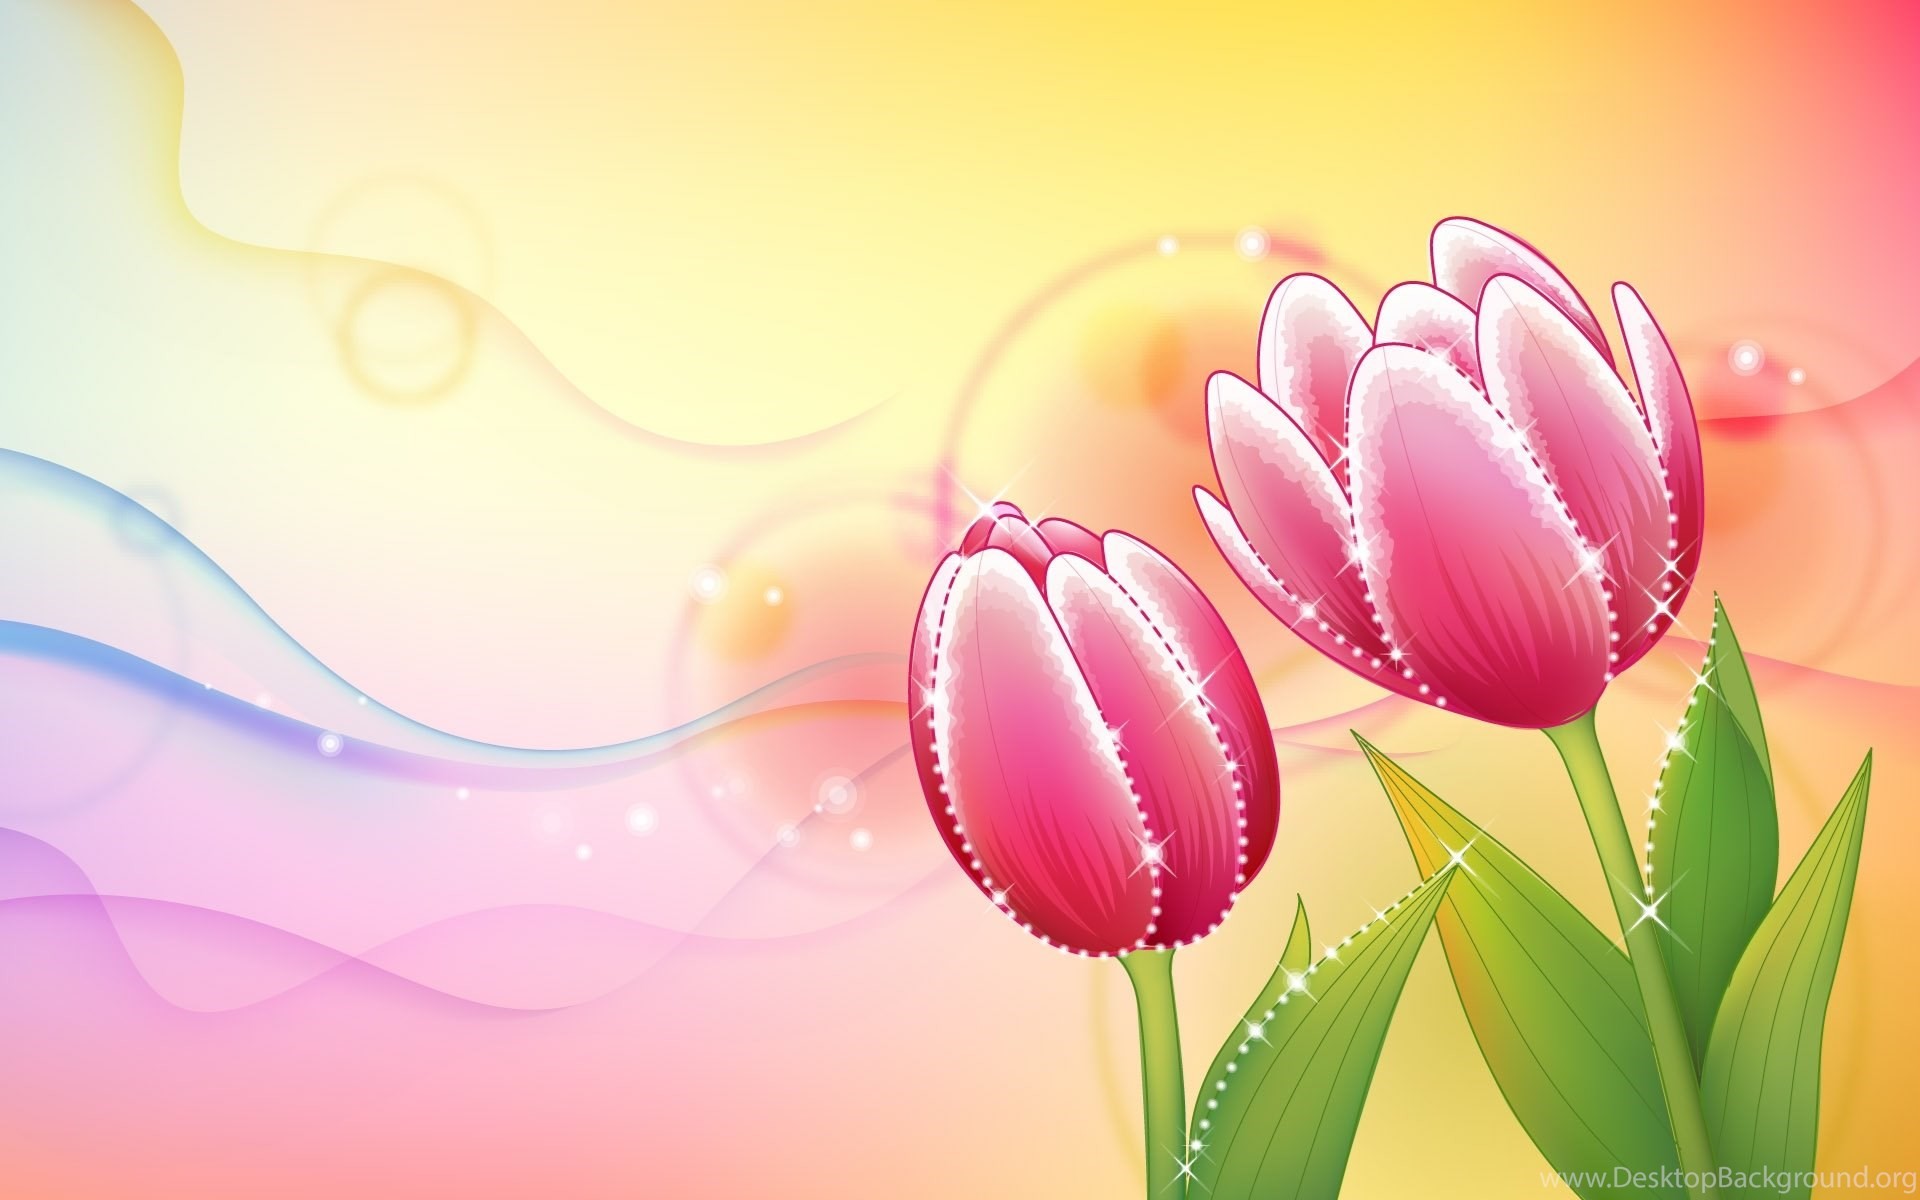 1920x1200 Wallpaper: Tulip, Flowers, Background, Shiny, Patterns Wallpapers